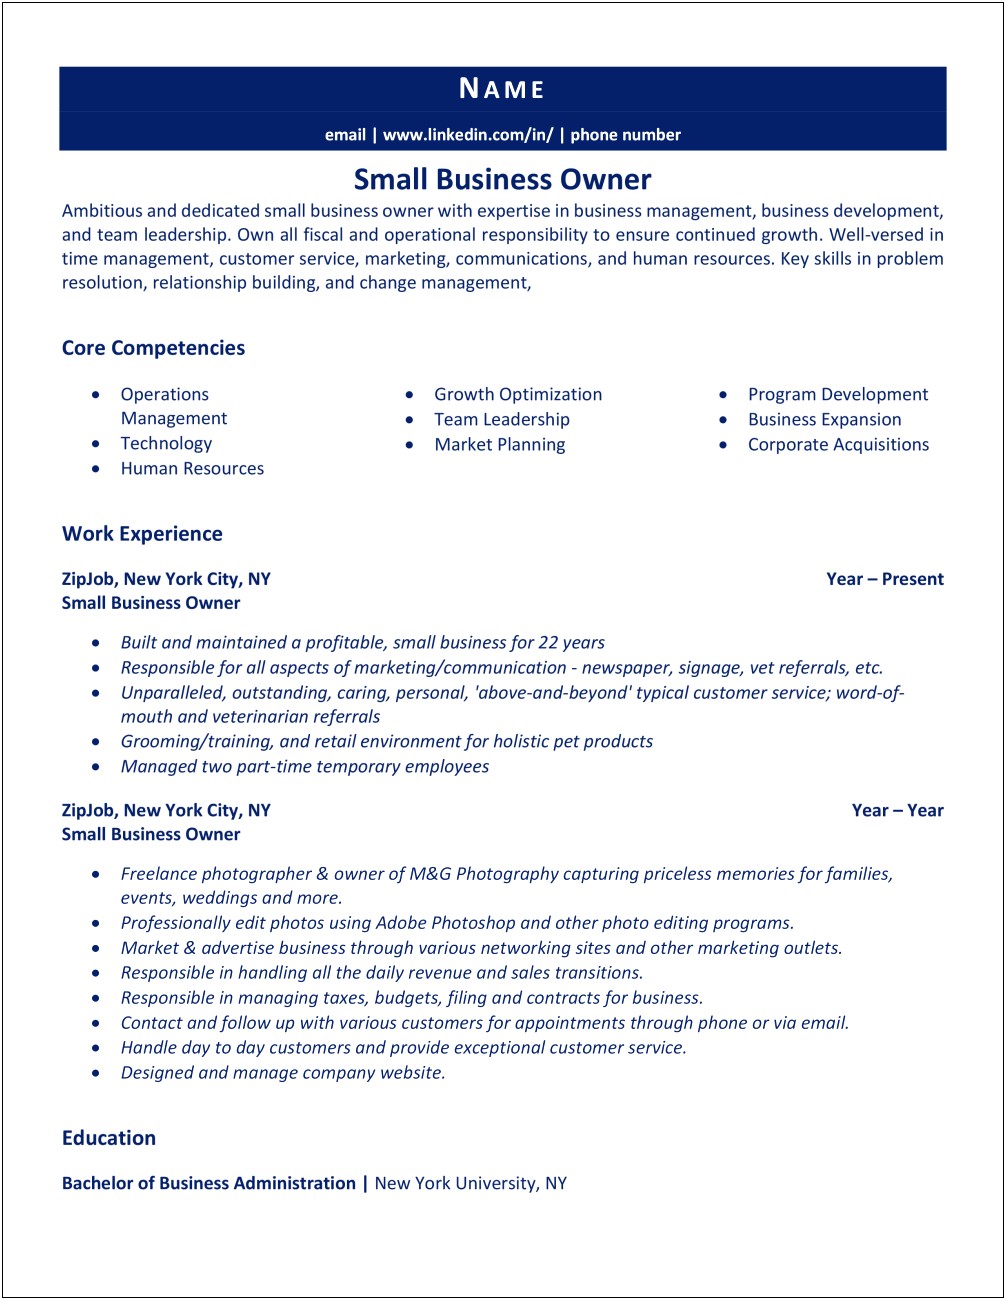 Resume Of Small Business Owner Samples